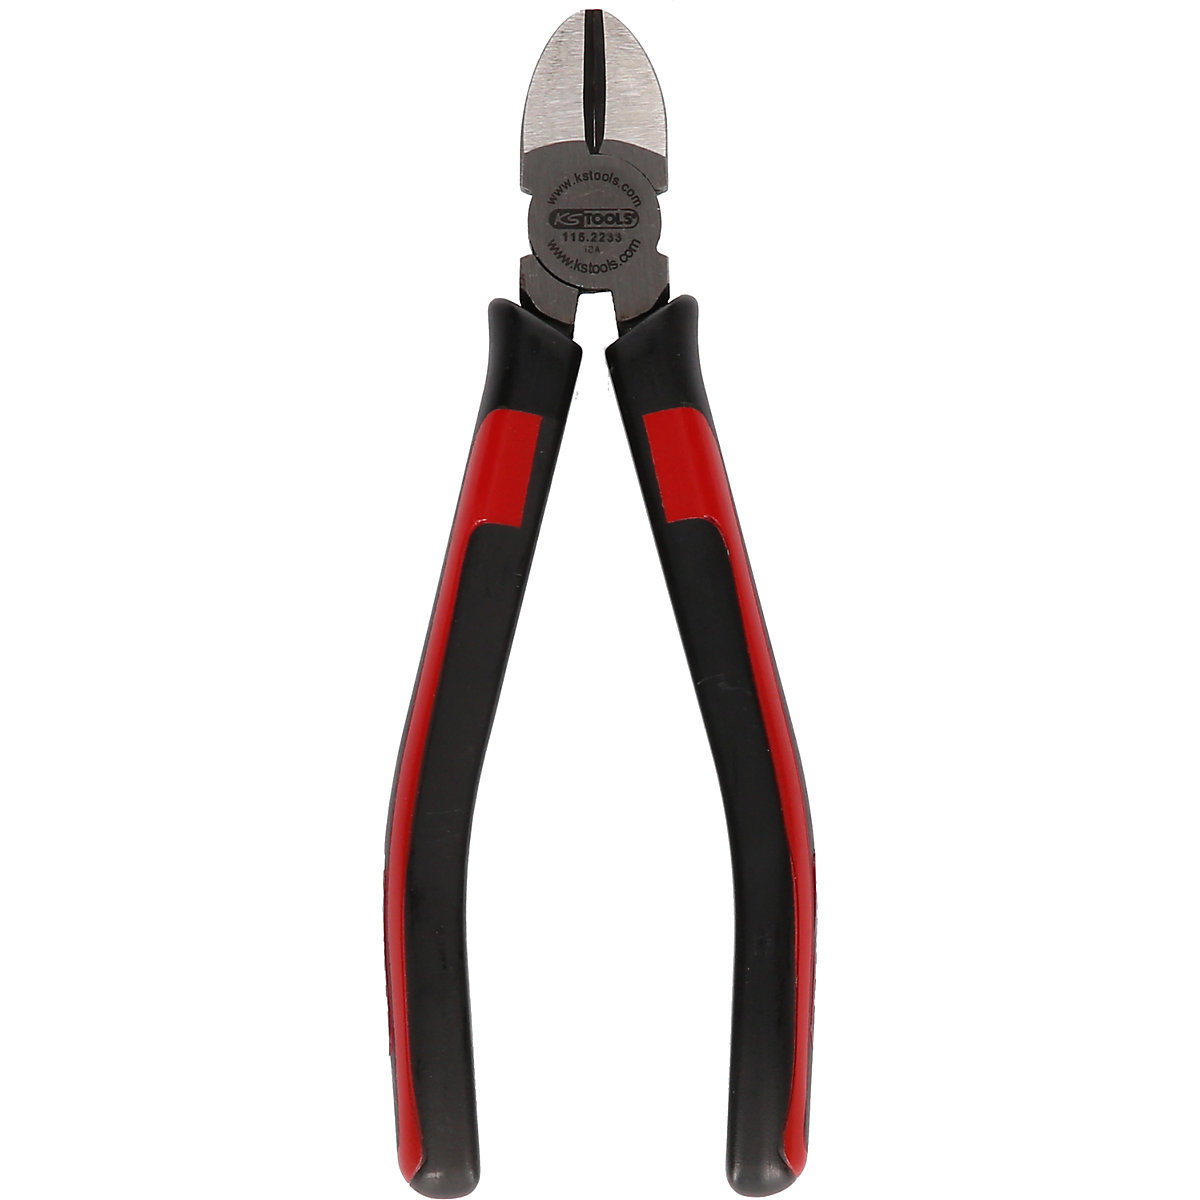 Tronchese a tagliente laterale diagonale SlimPOWER - KS Tools